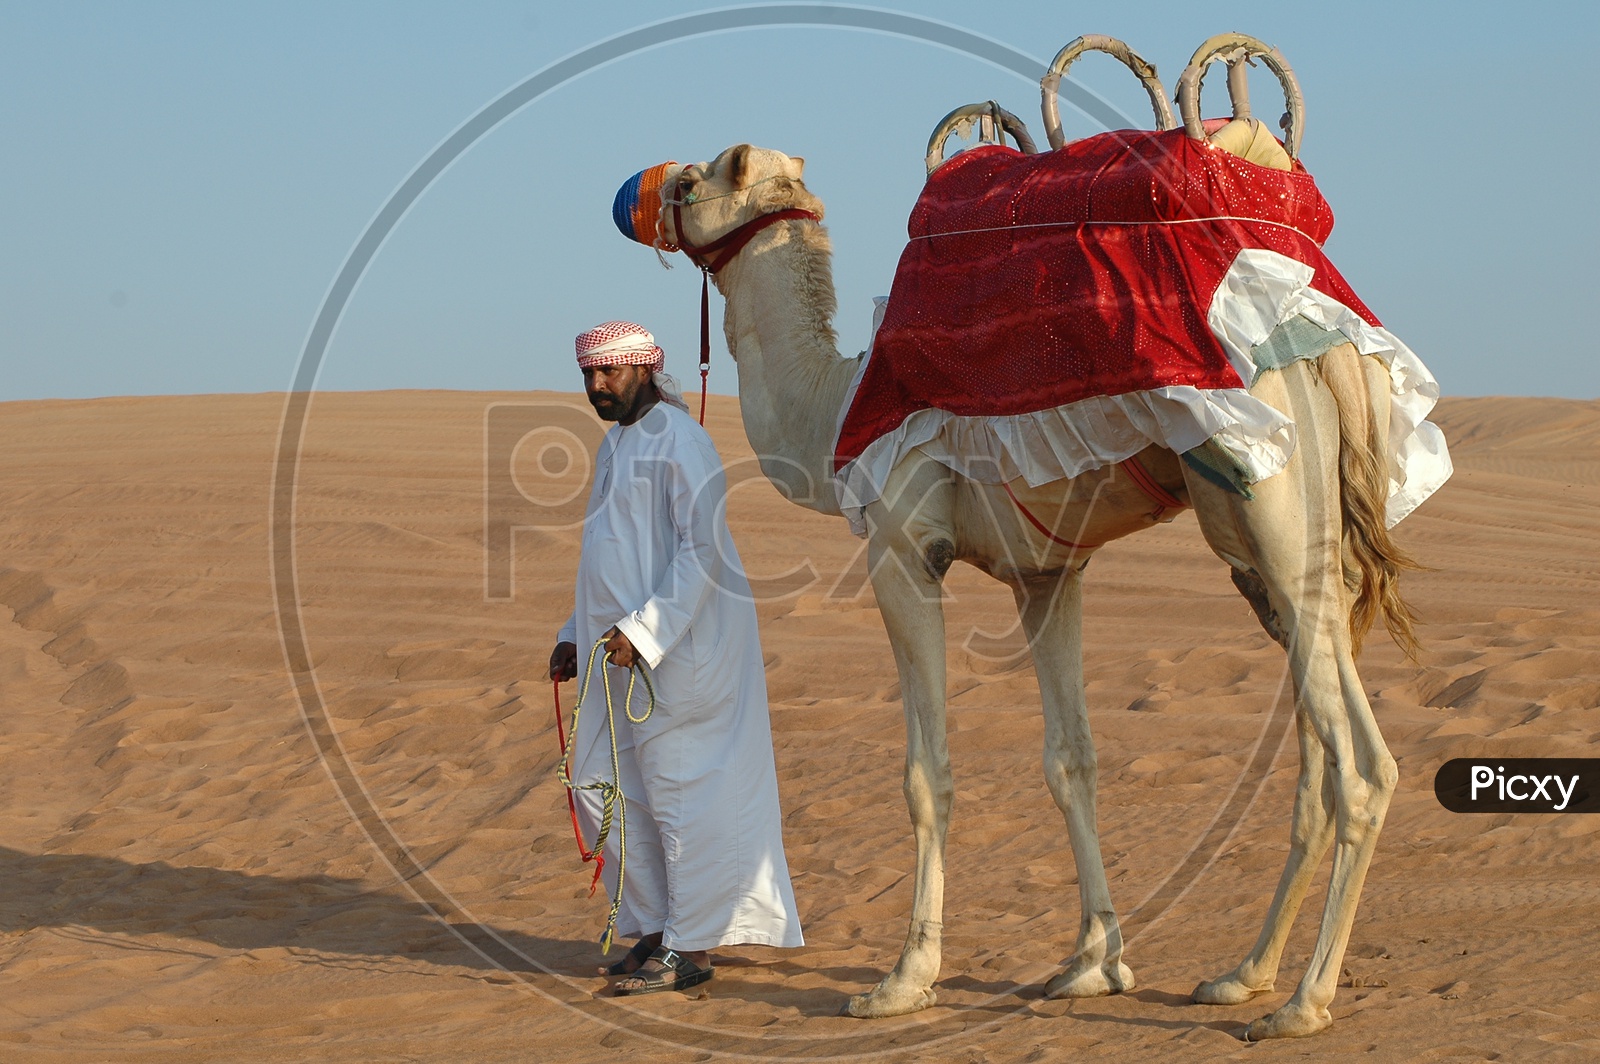 A camel herder with a camel in the desert